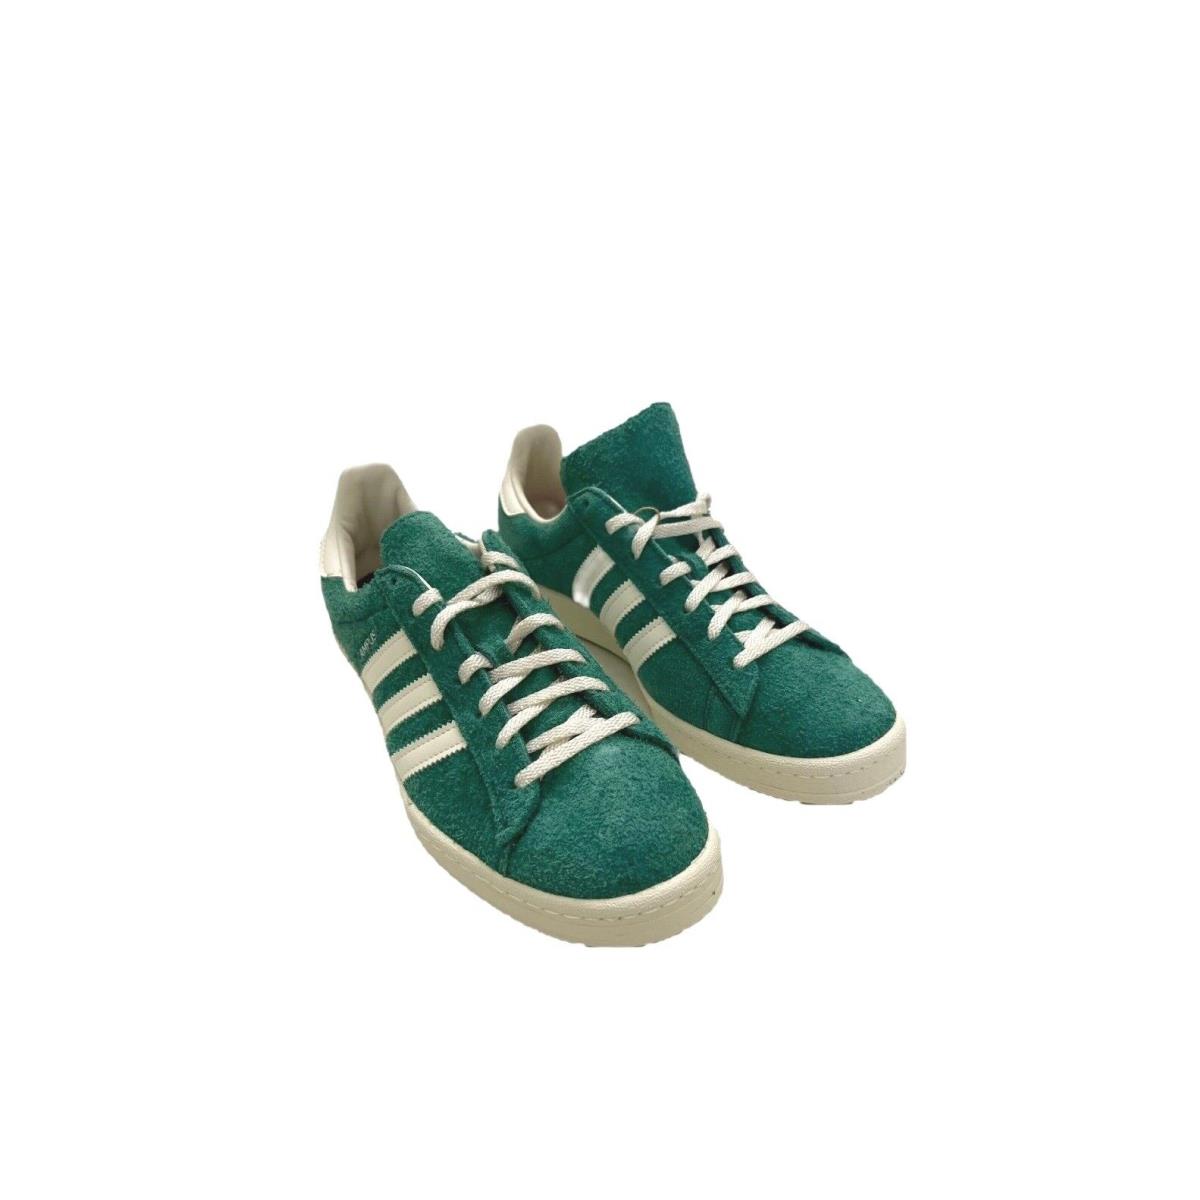 Adidas Men`s Campus 80`s Casual /activewear Shoes - Collegiate Green/Off White/Off White